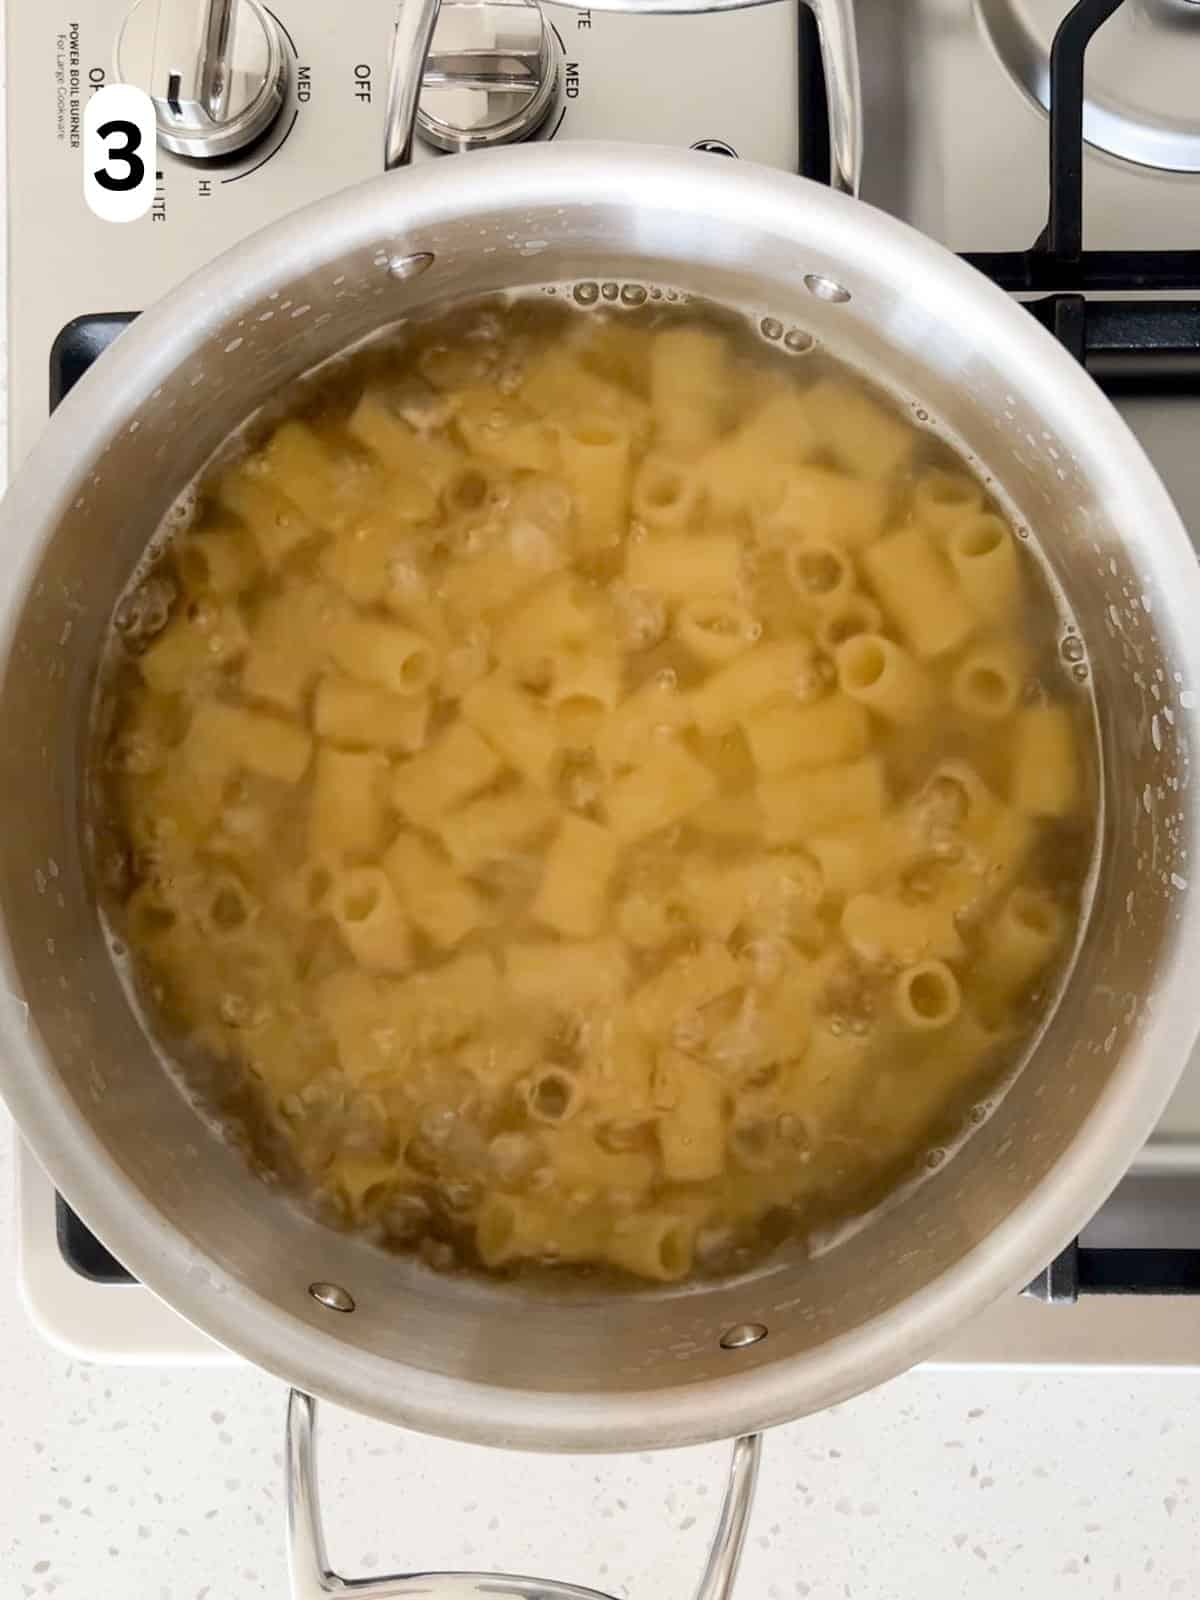 Rigatoni is boiled in a large pot.